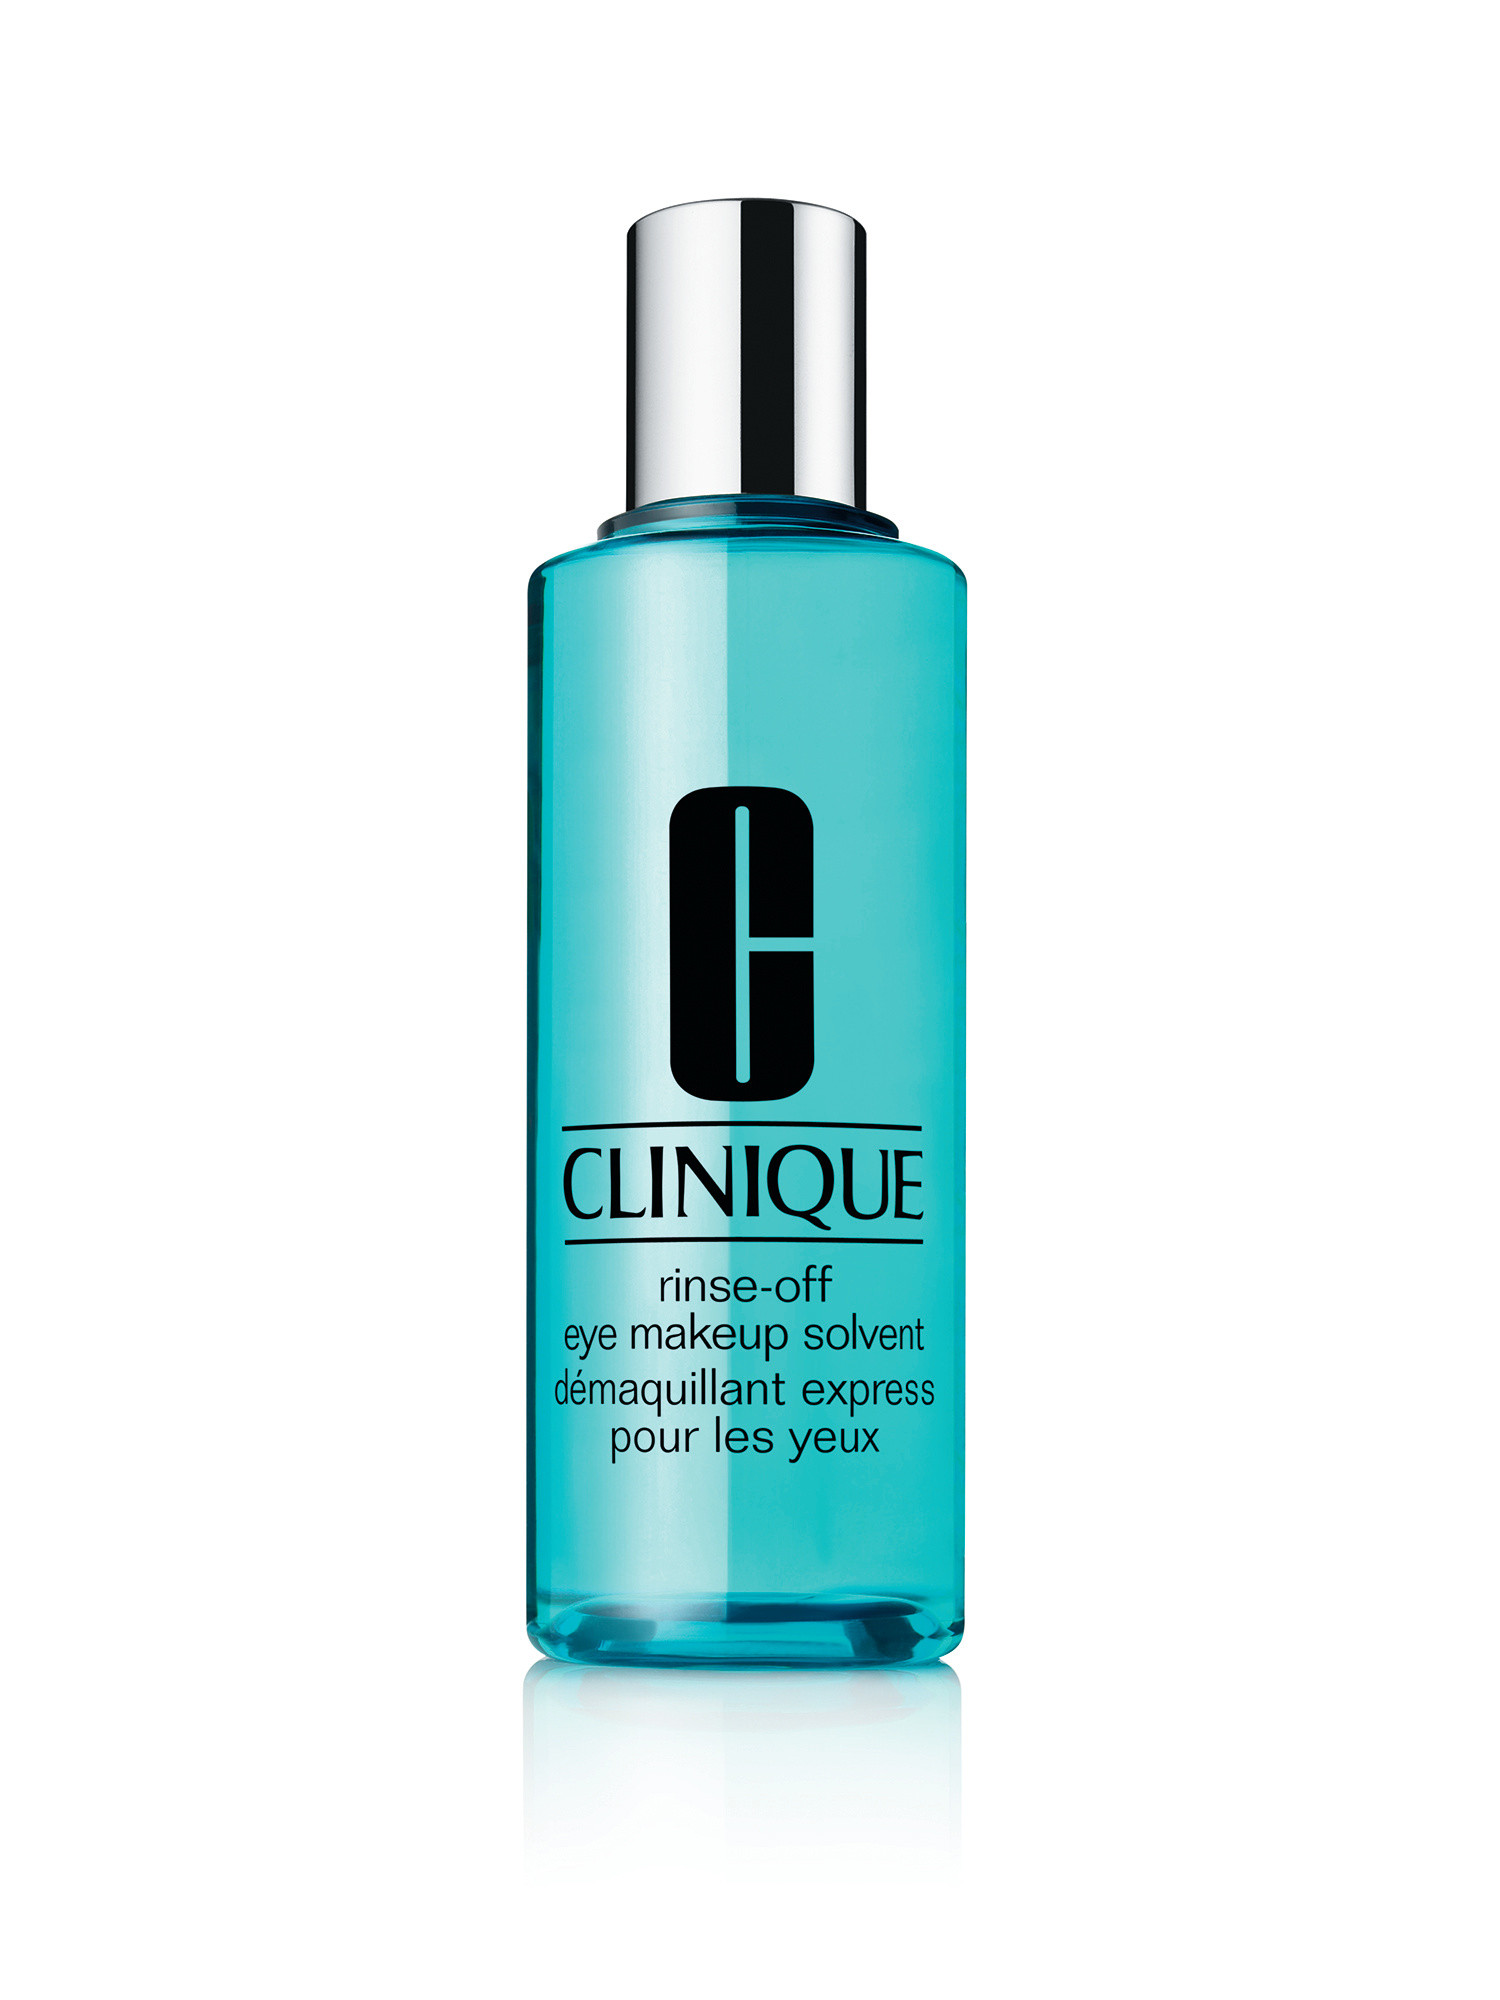 Clinique rinse-off makeup solvent 125 ml, Azzurro, large